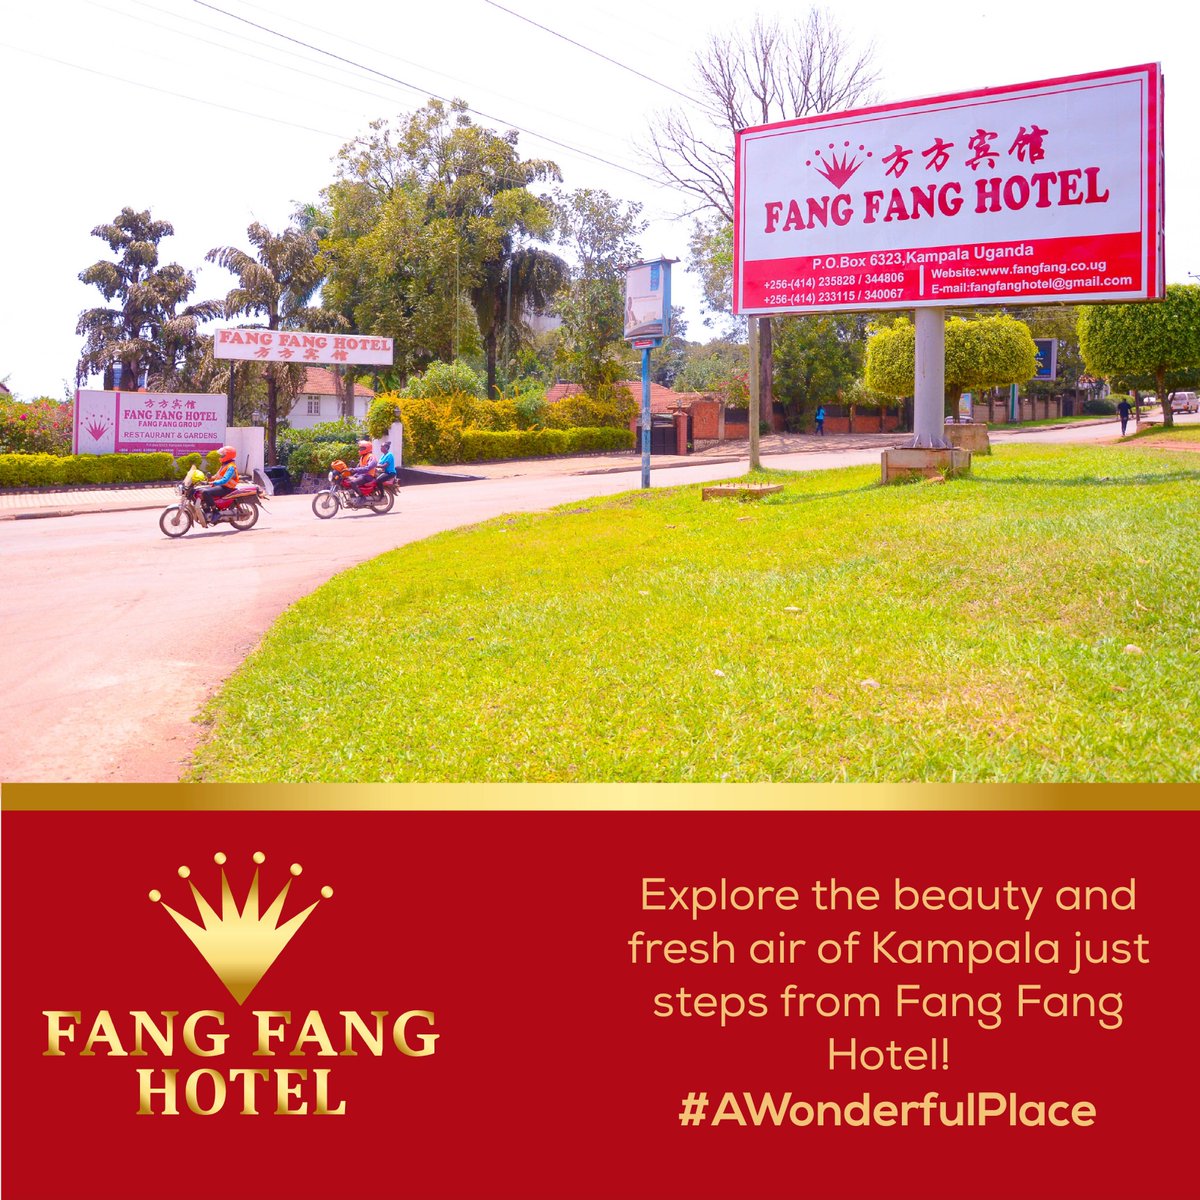 Explore the hustle and bustle of Kampala just steps from Fang Fang Hotel! #AWonderfulPlace 🌃